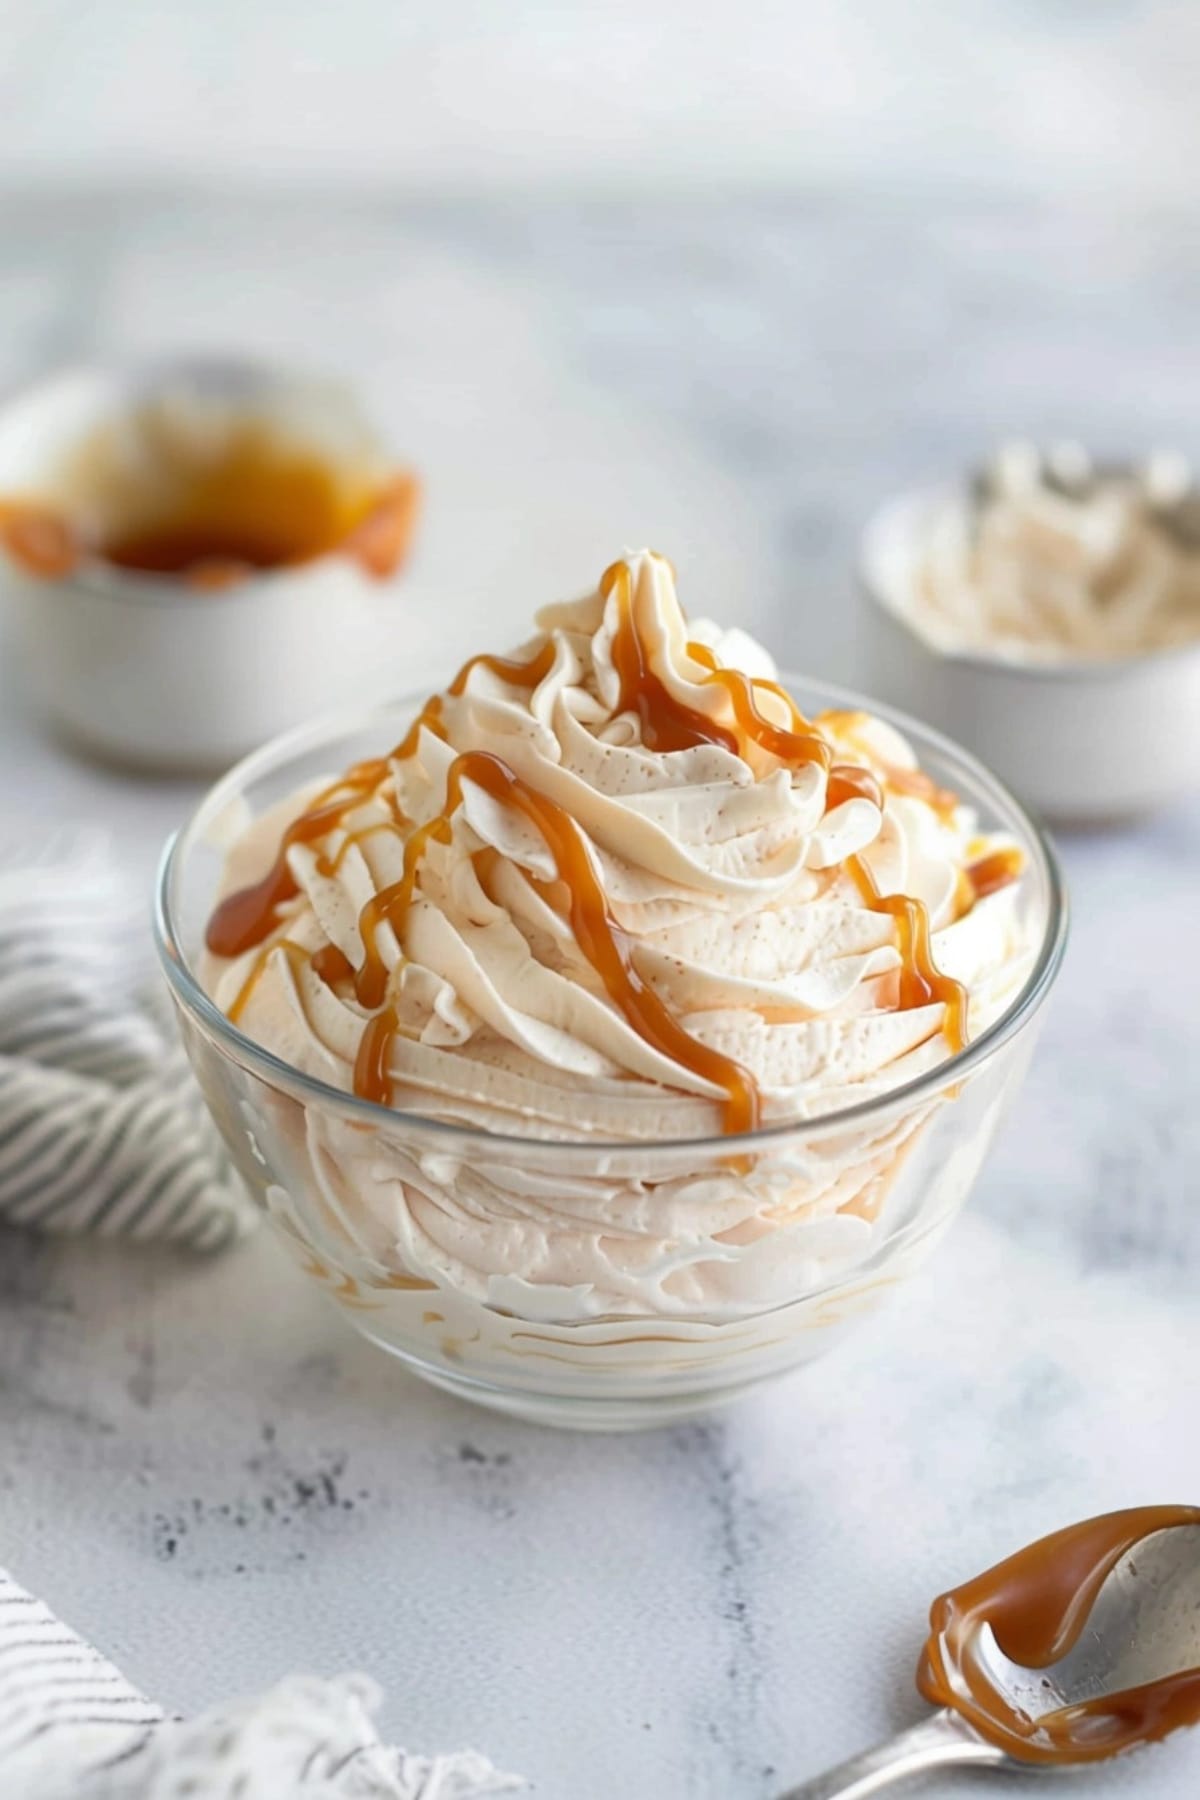 Whipped cream with salted caramel in a glass bowl.